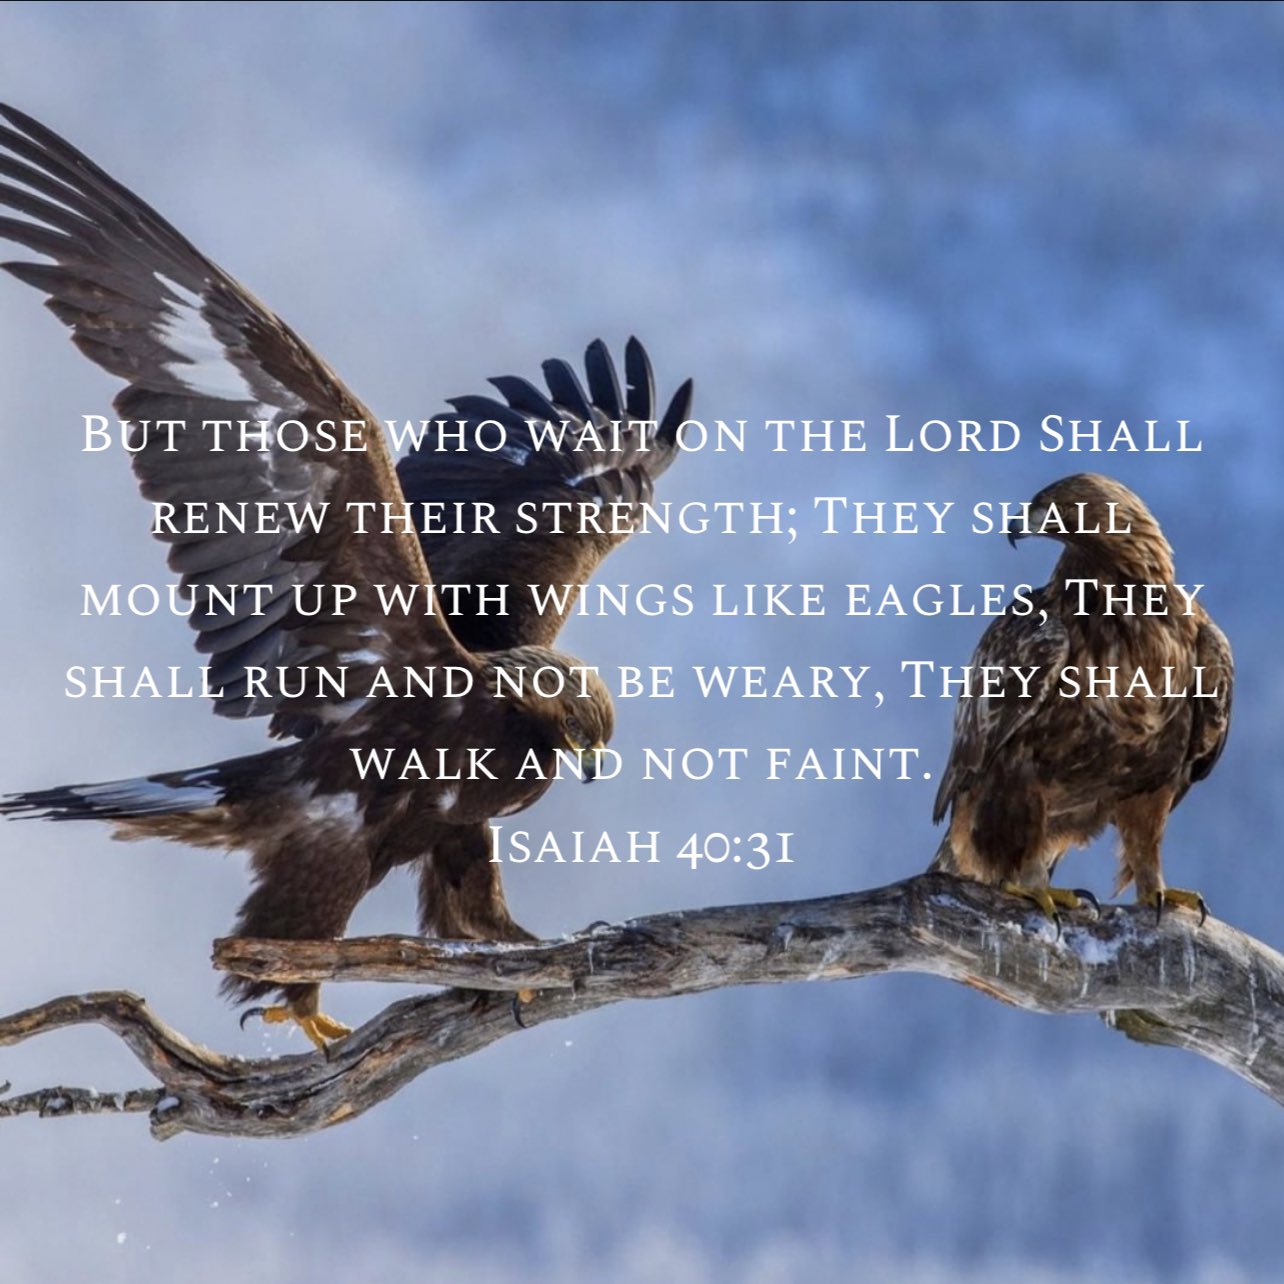 BUT THOSE WHO WAIT ON THE LORD SHALL RENEW THEIR STRENGTH; THEY SHALL MOUNT UP WITH WINGS LIKE EAGLES THE SHALL RUN AND NOT BE WEARY, THEY SHALL WALK AND NOT FAINT- ISAIAH 40.31